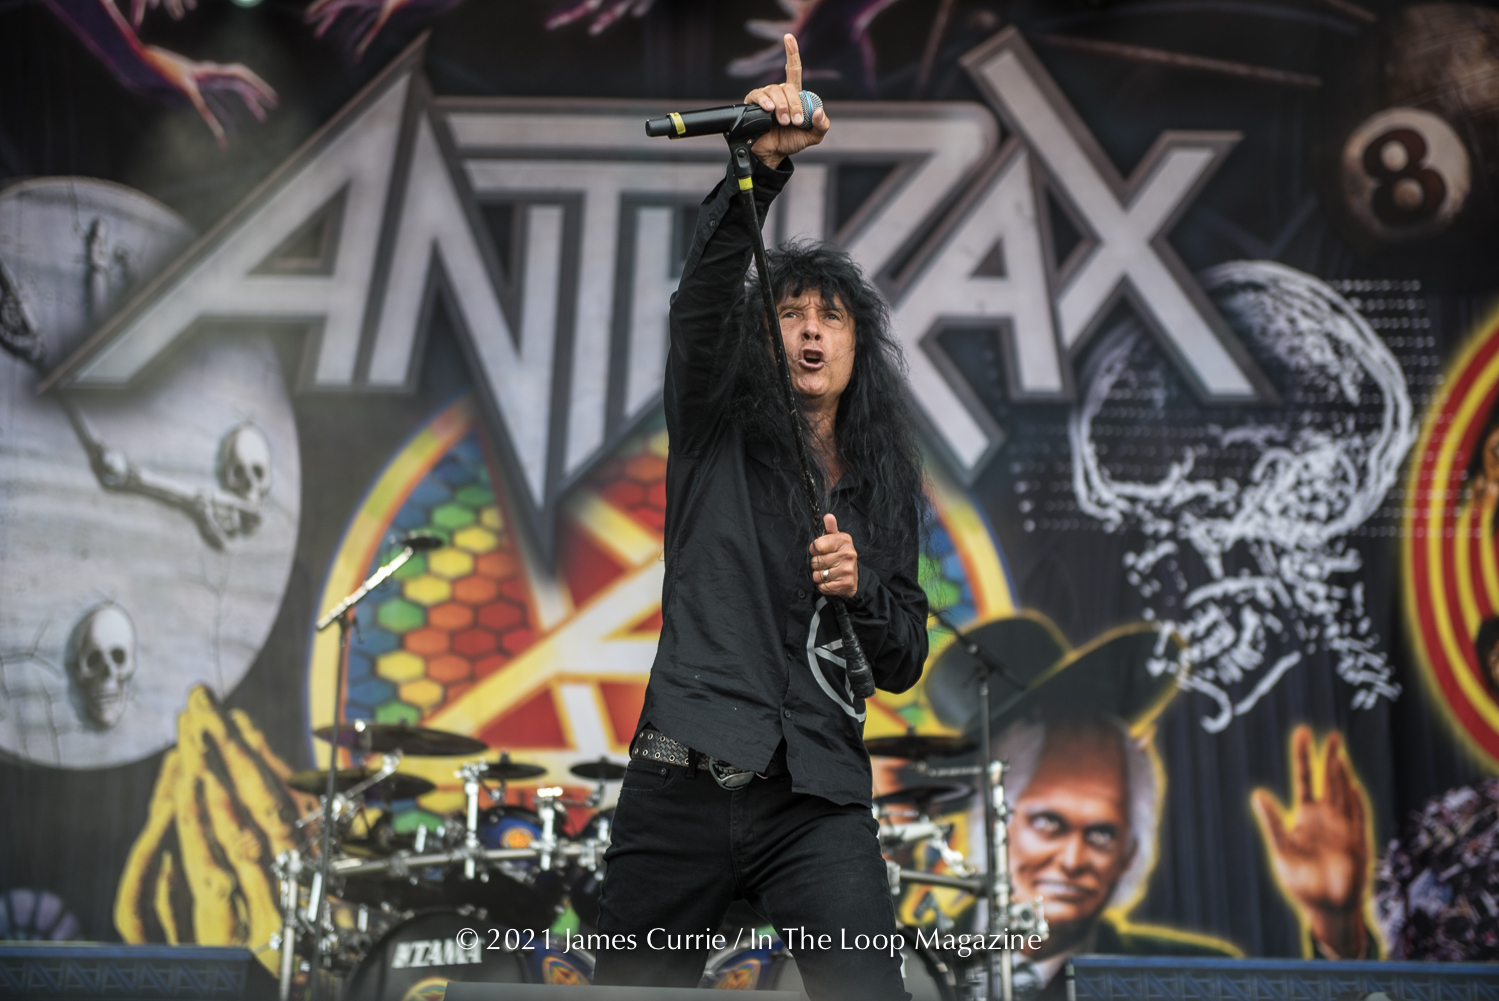 Photo Gallery: Anthrax @ Riot Fest 2021